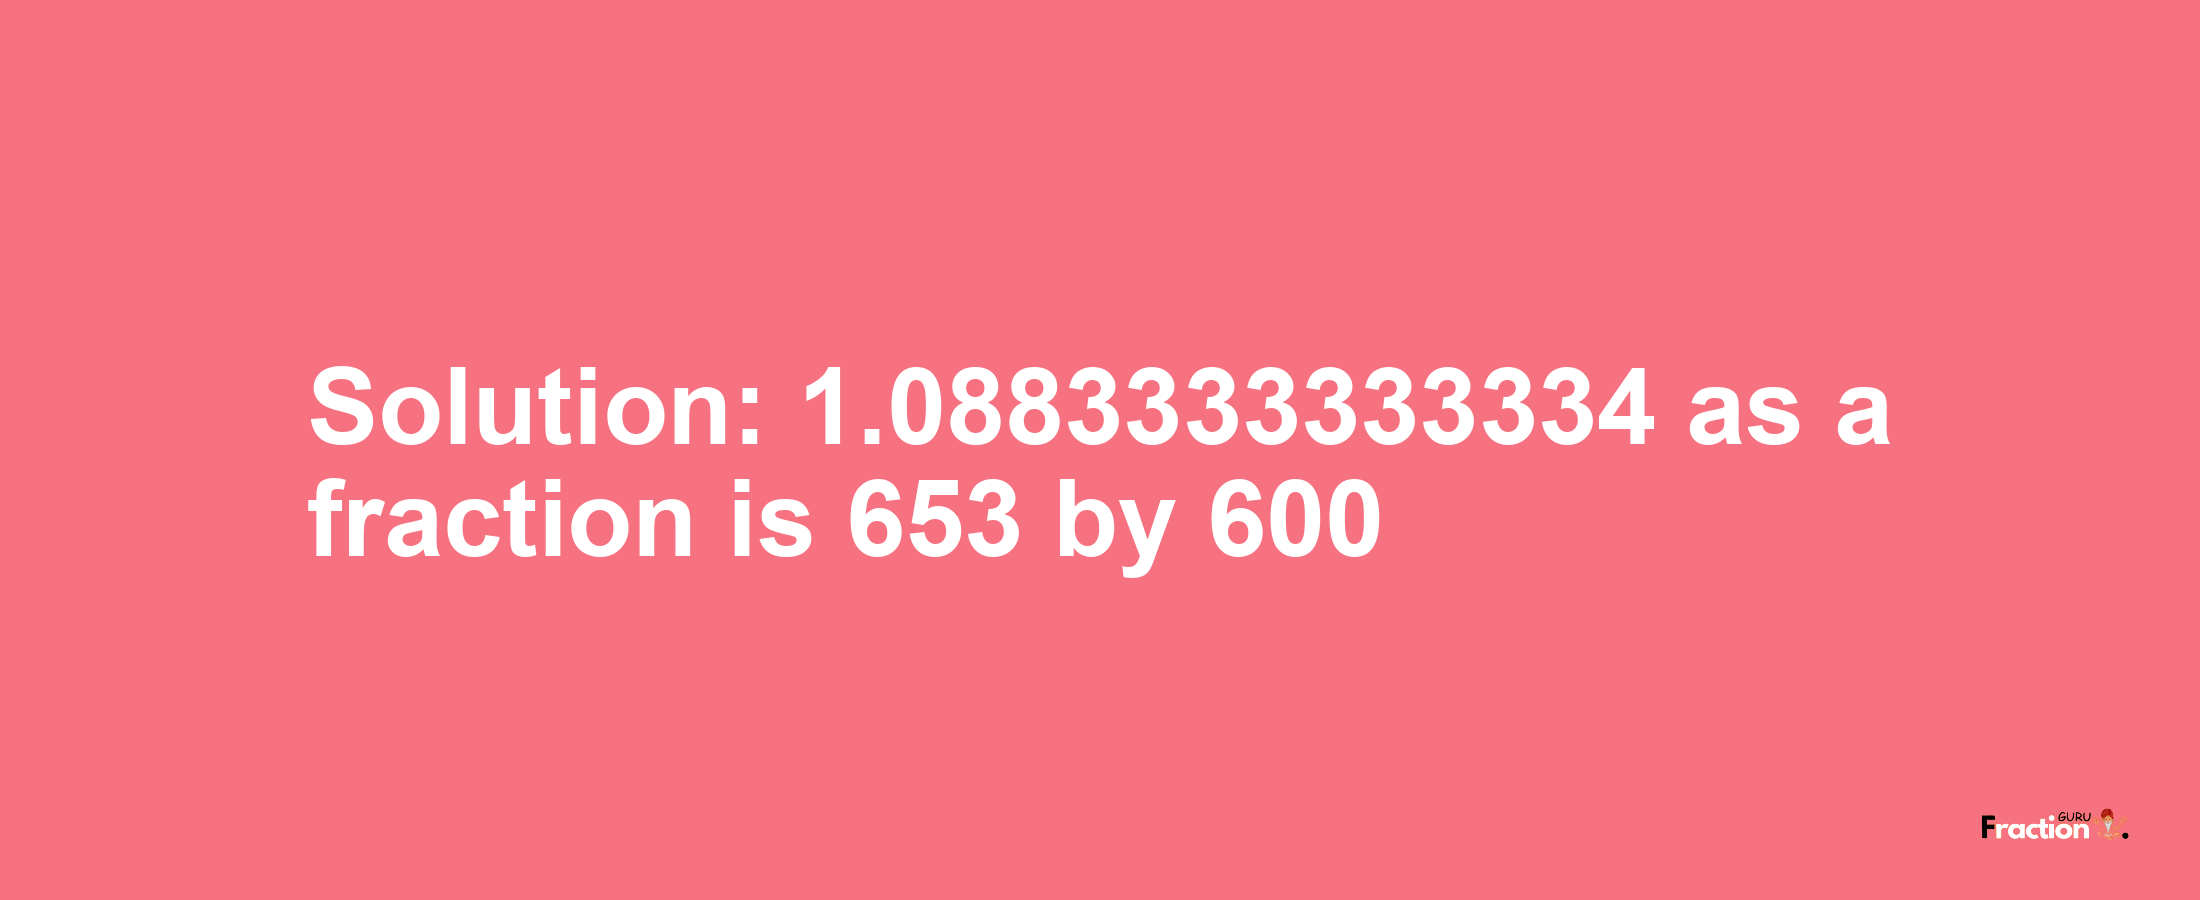 Solution:1.0883333333334 as a fraction is 653/600